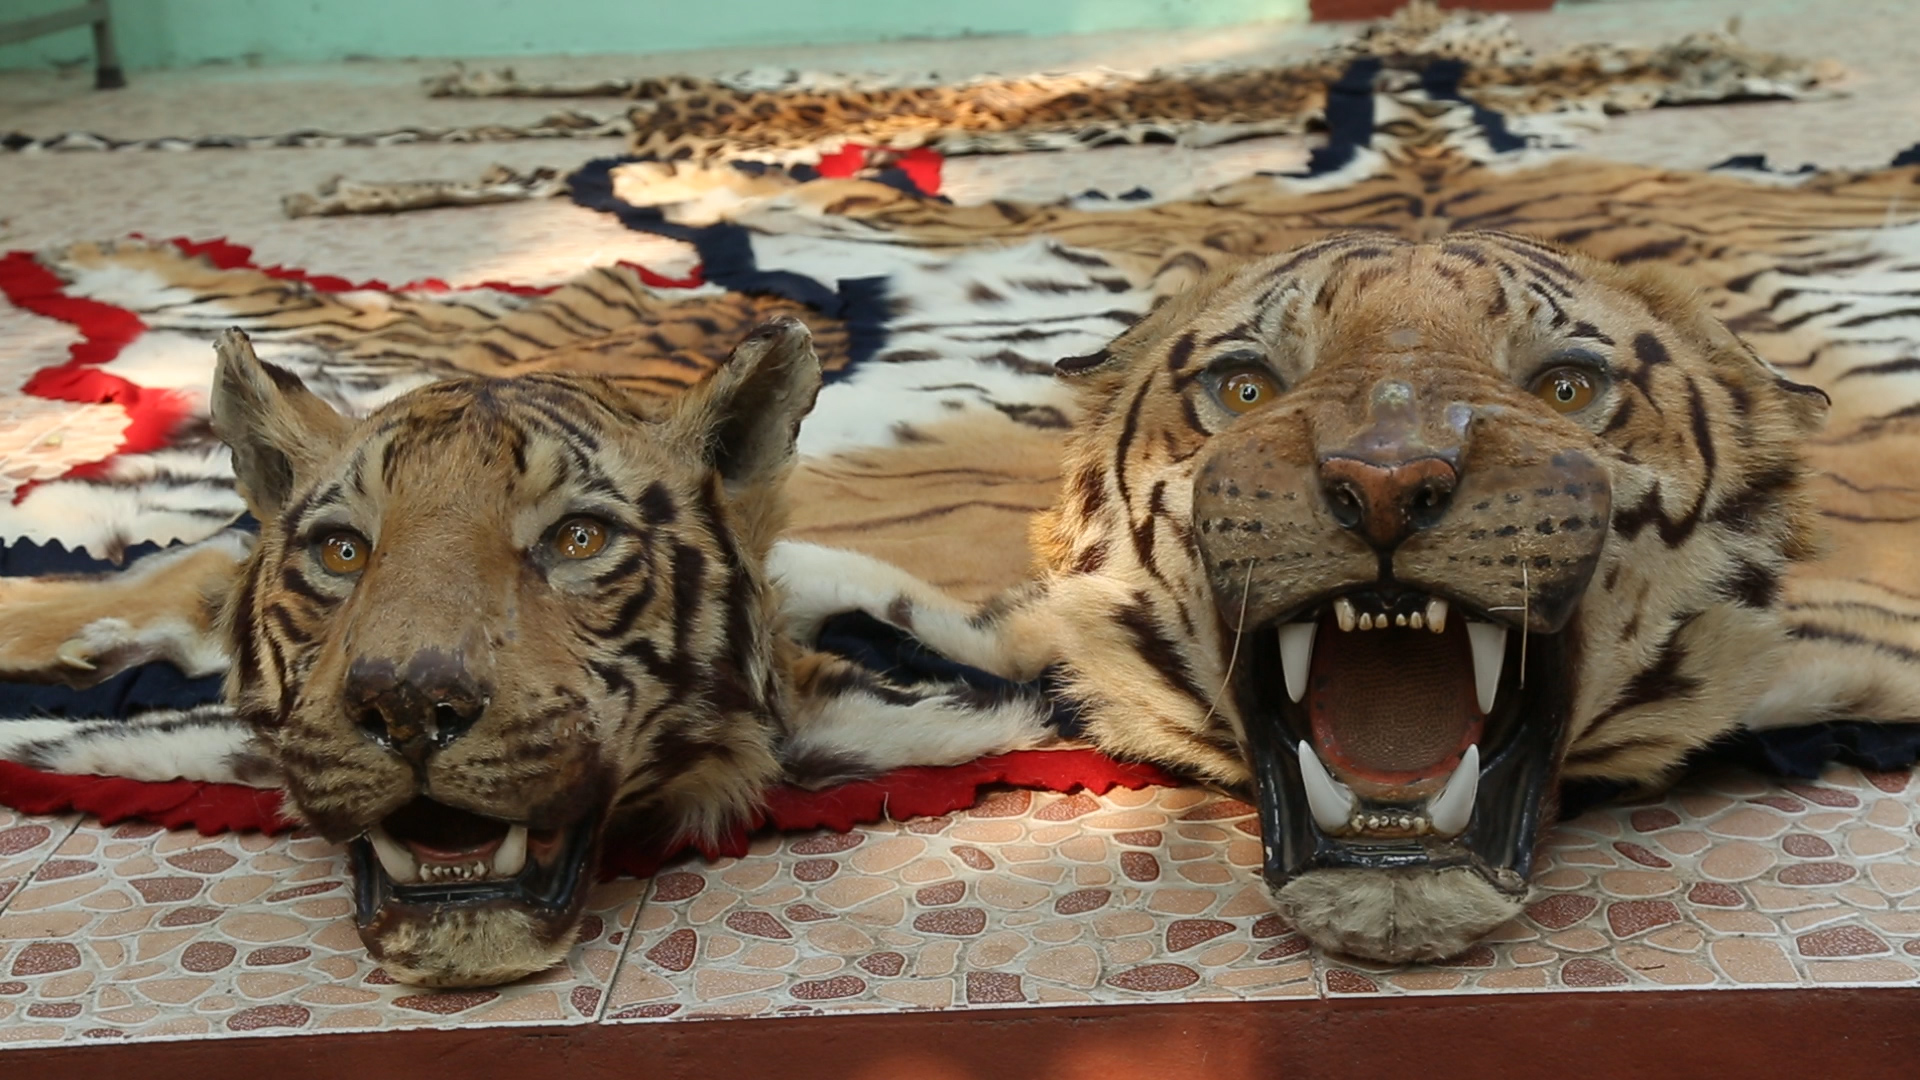 Poacher Guilty of Killing 125 Tigers and 1025 Leopards Convicted